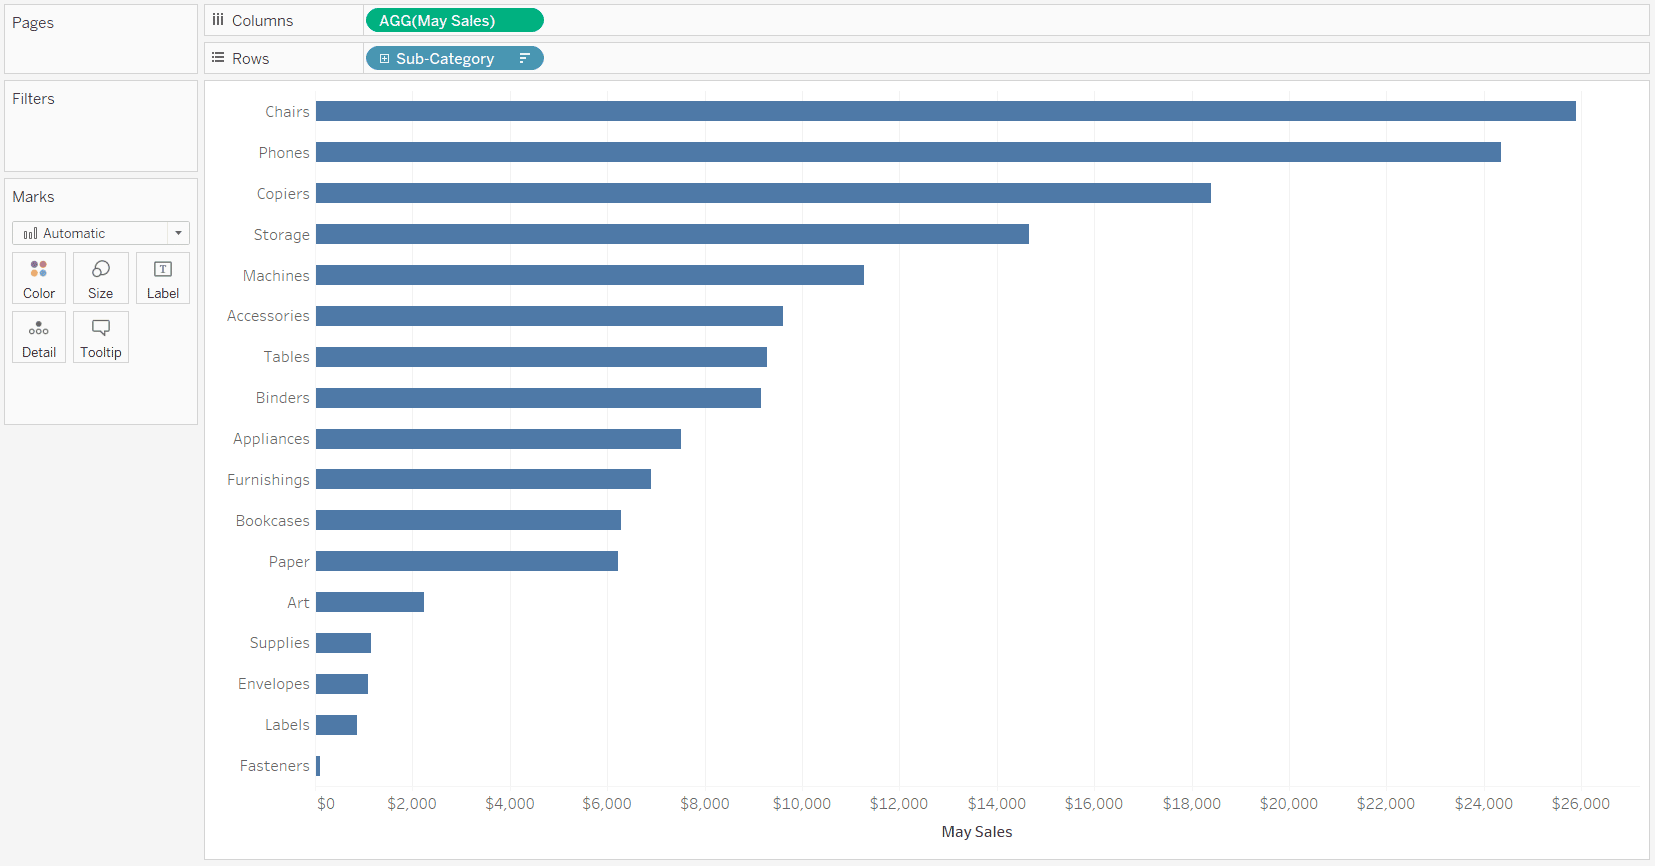 May Sales by Sub-Category Bar Chart in Tableau